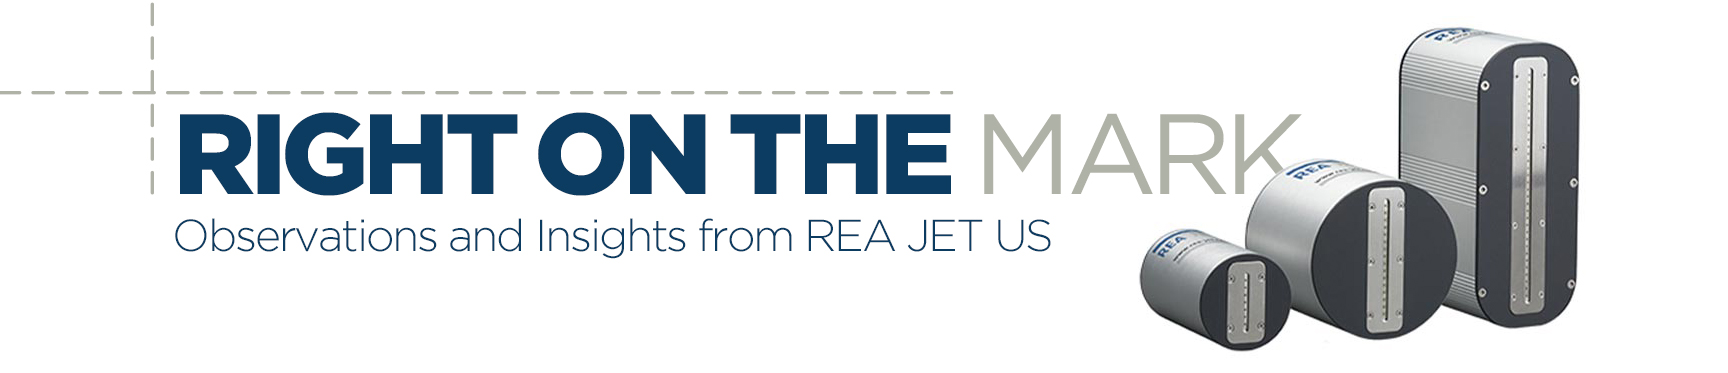 right on the mark, observations and insights from REA Jet US, blog header graphic